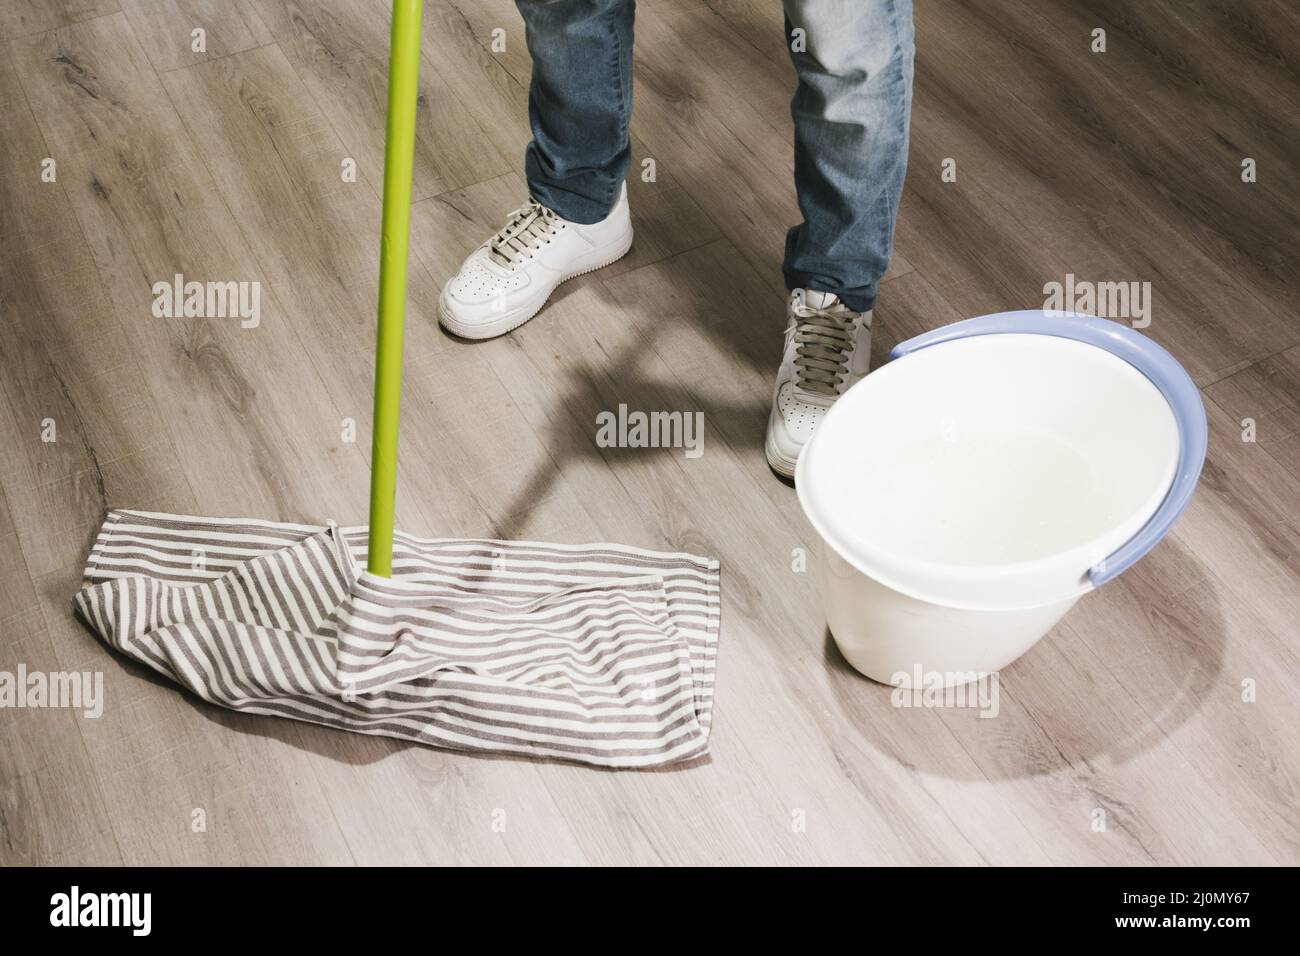 Close up man mopping floor Stock Photo